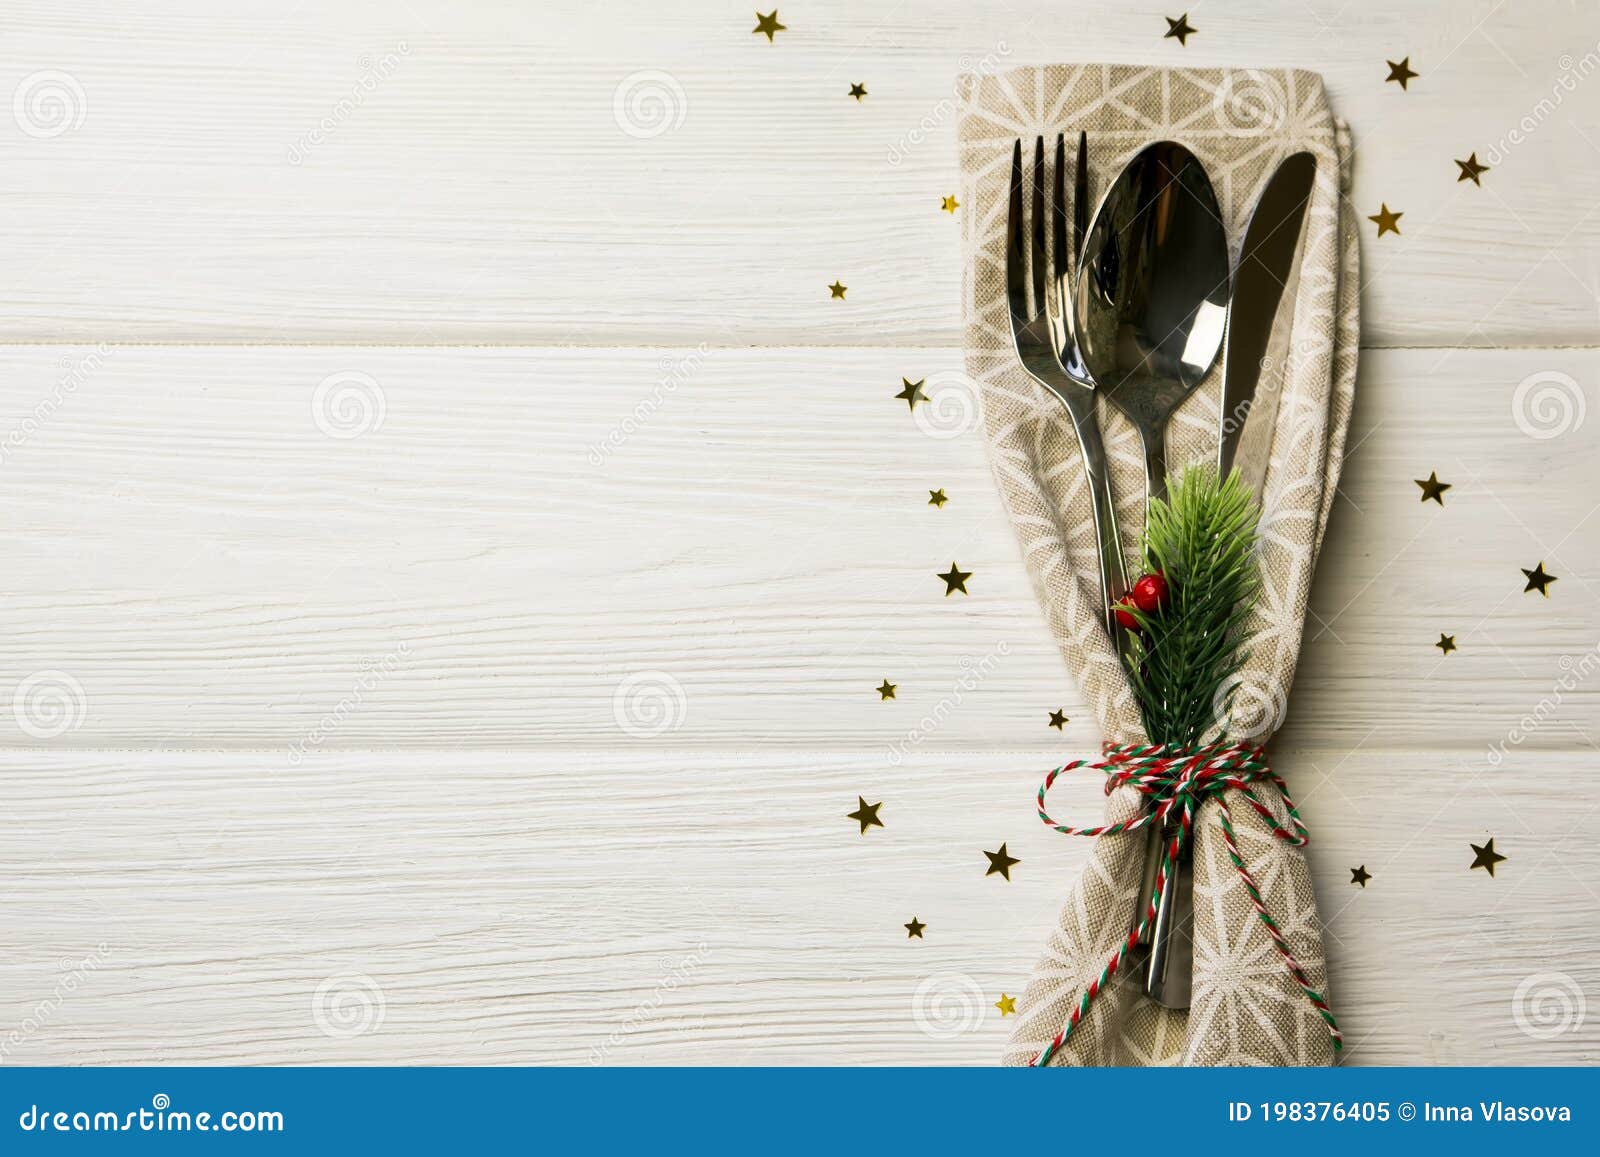 Christmas Dinner Table Place Setting, Festive Background Stock Image ...